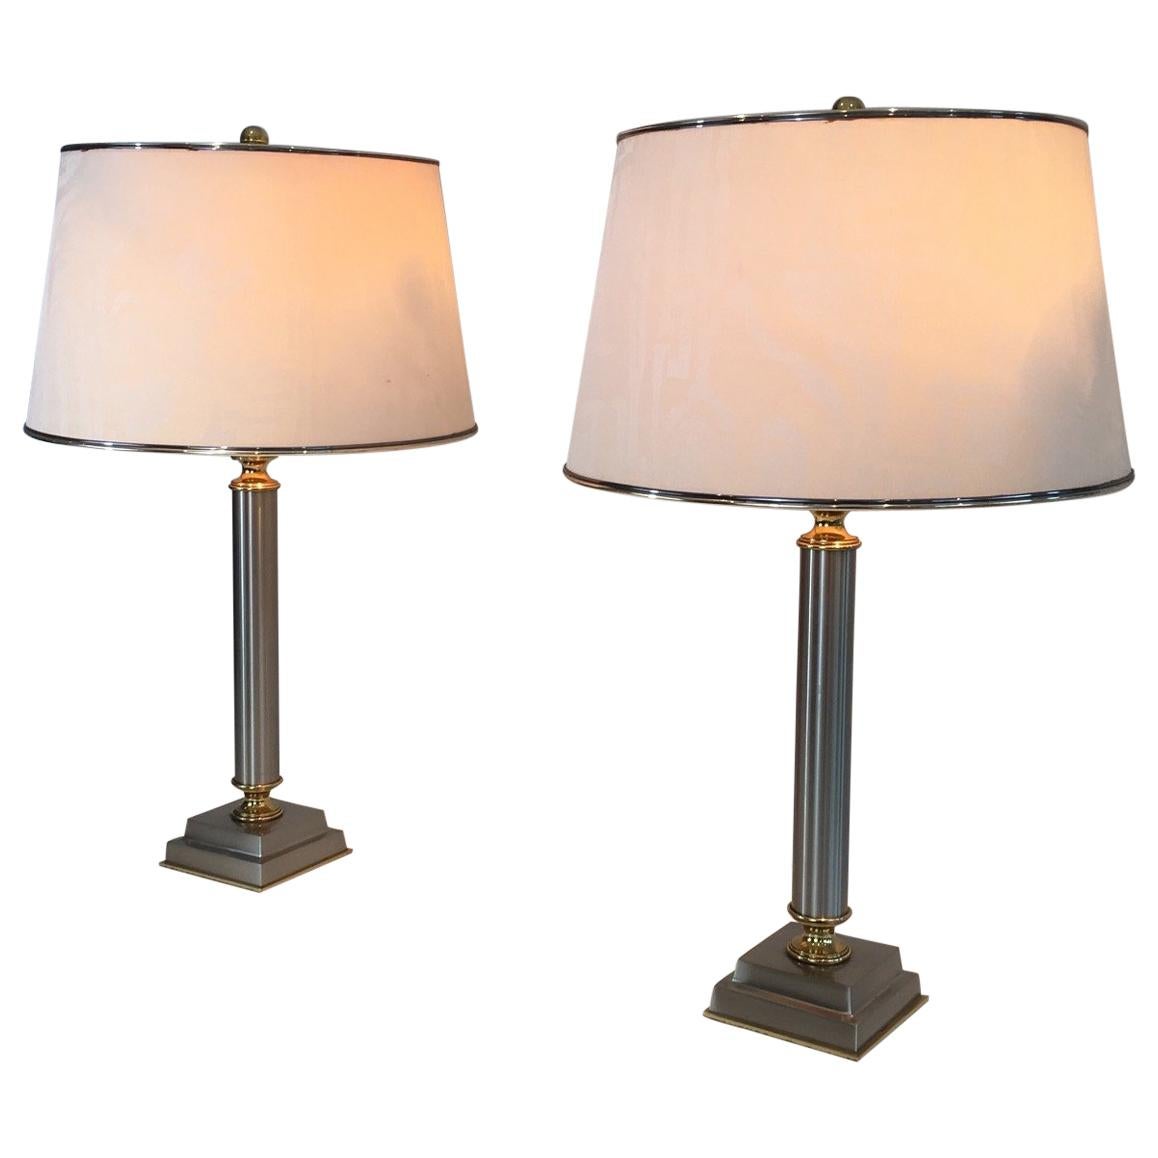 Pair of Brushed Steel and Brass Lamps with Reclining Shades by Guy Lefèvre